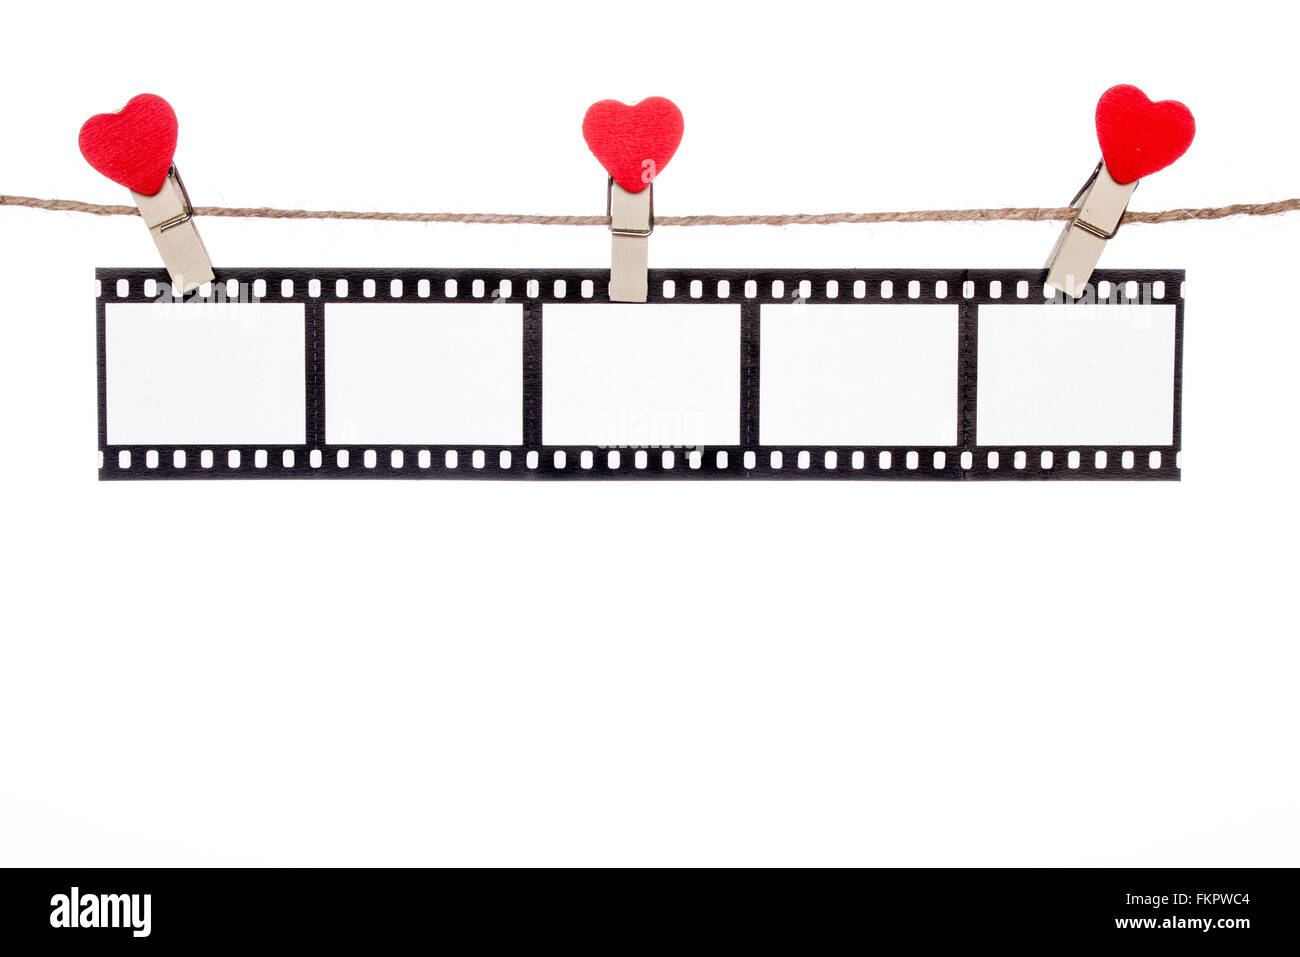 heart  shape clip on a clothesline , hanging Negatives, love movie memory Stock Photo